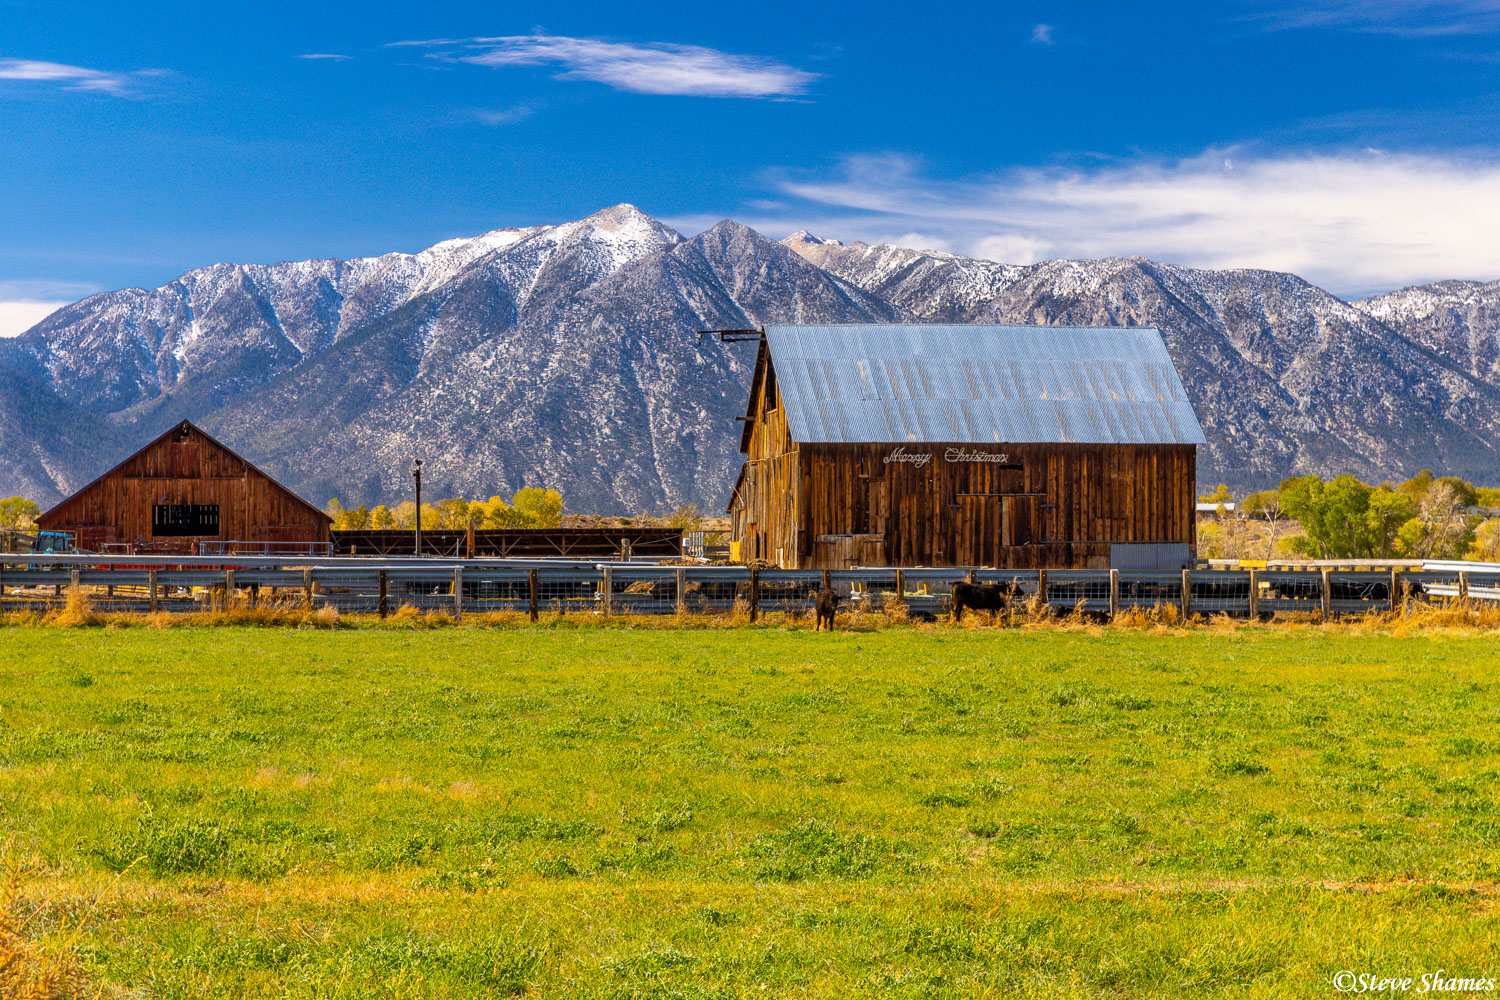 Driving on Highway 395 through Gardnerville, there are spectacular views of the Sierras. I thought this old barn made for an...